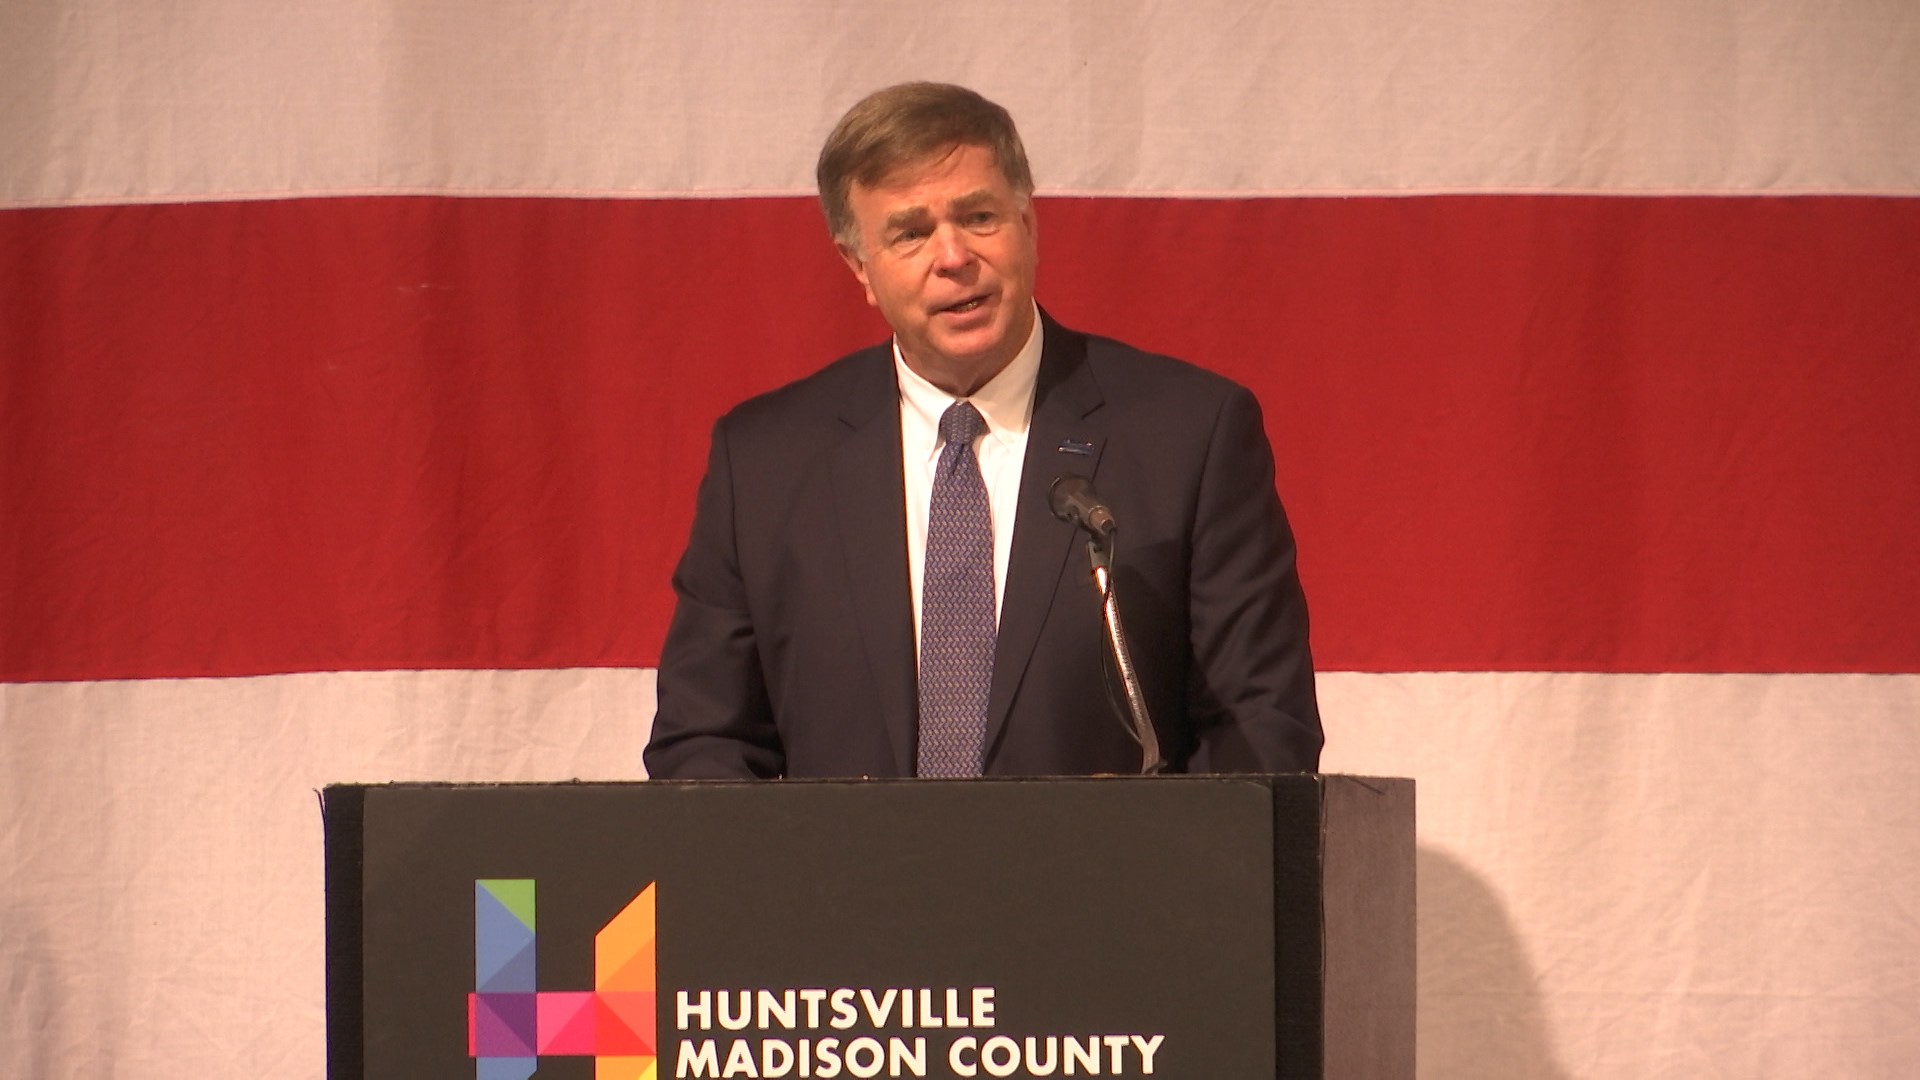 Huntsville Mayor Tommy Battle also used the time to tell the 1500  people to vote on December 12th for a schools property tax renewal.